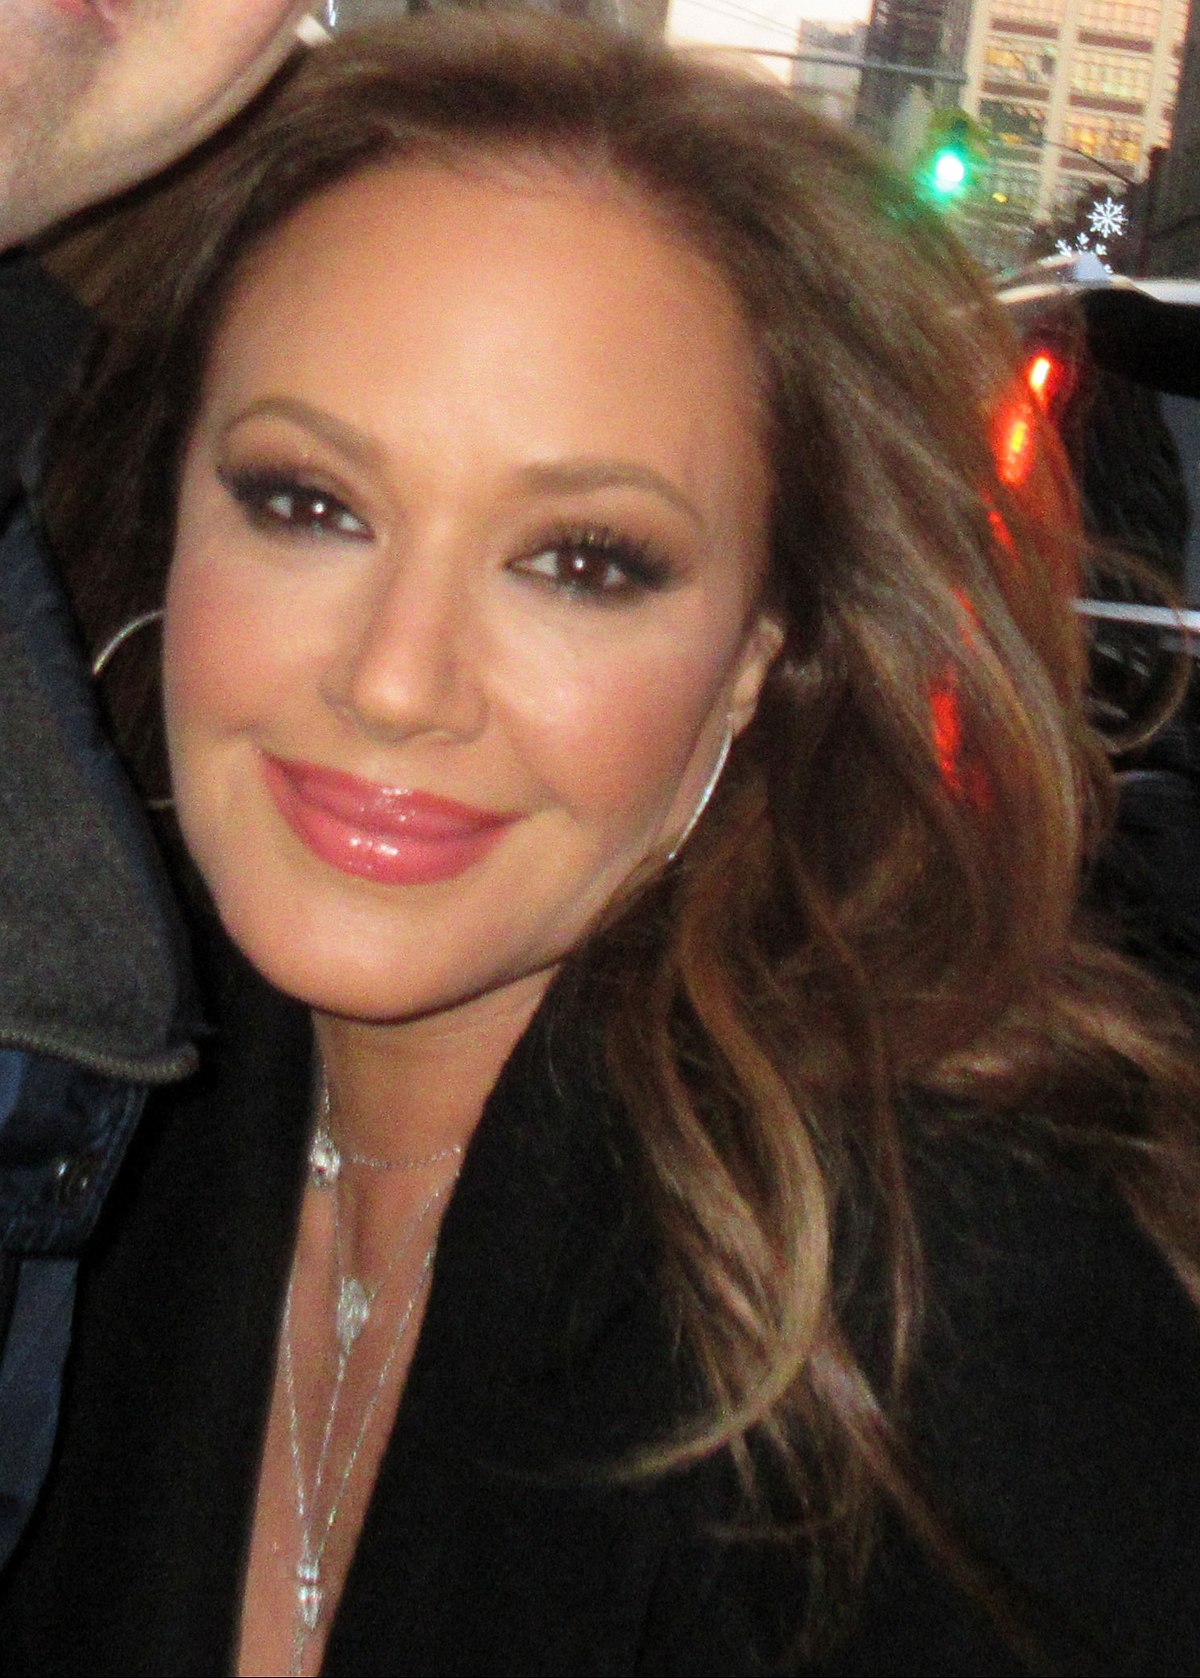 becky luther recommends Leah Remini Look Alike